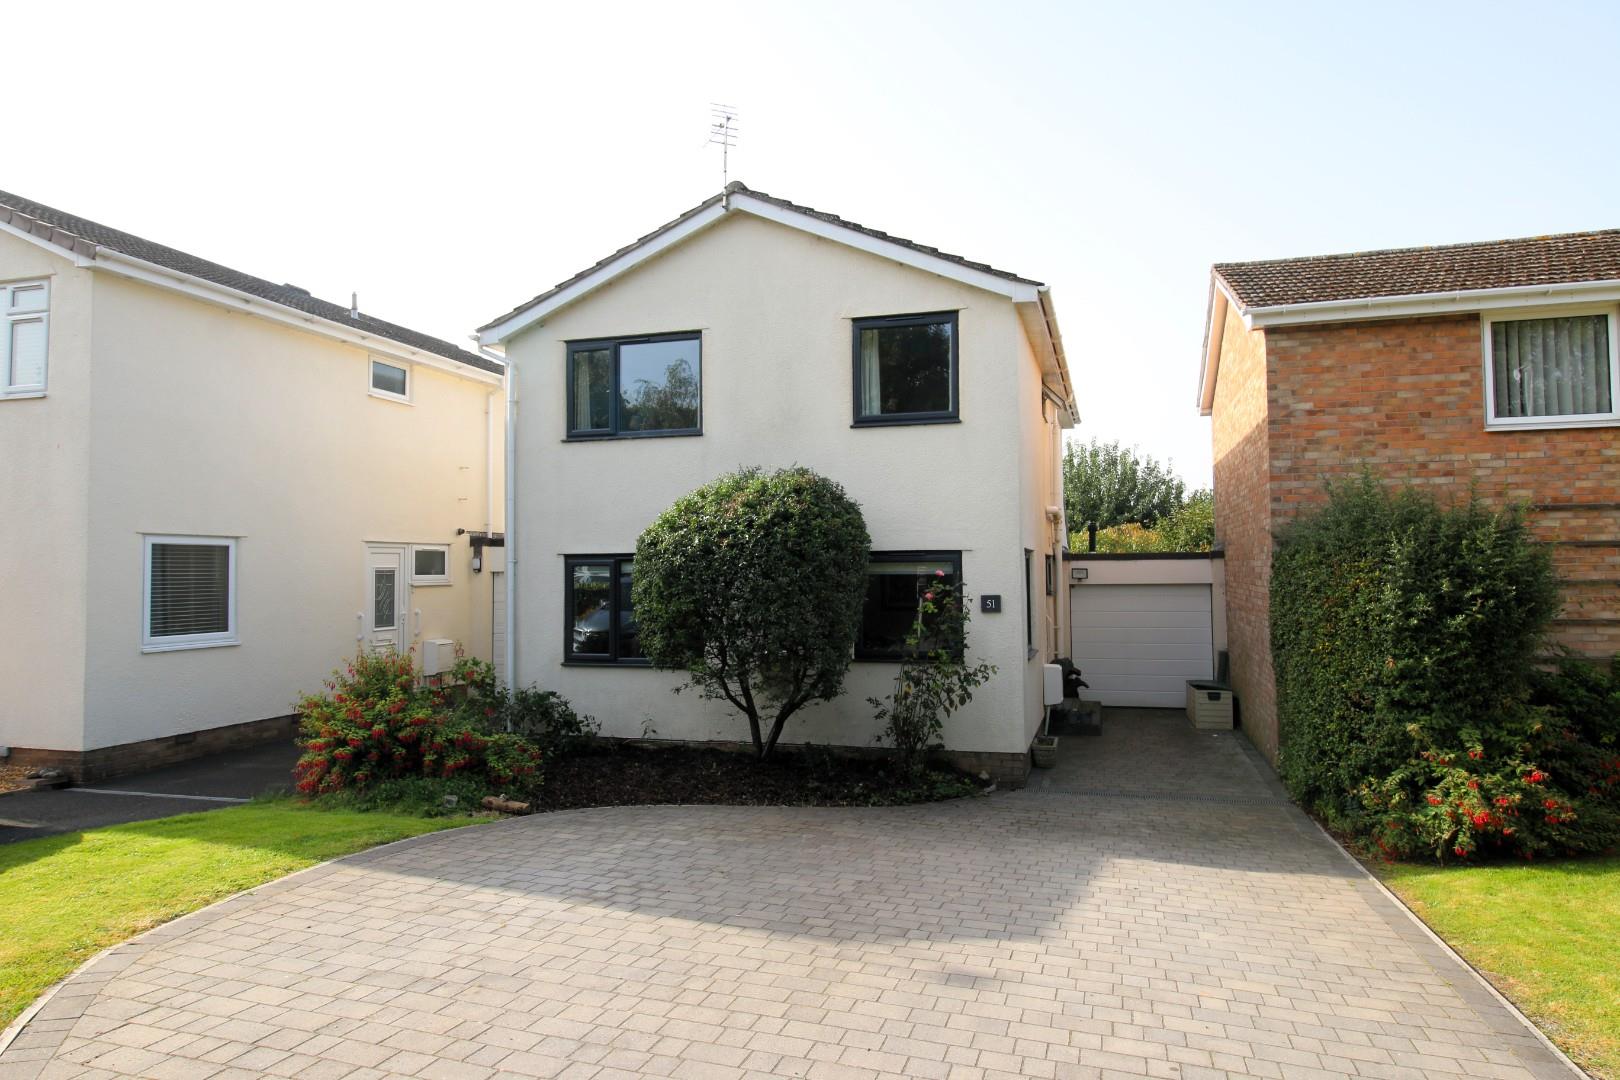 Extended family home backing onto Yatton's countryside